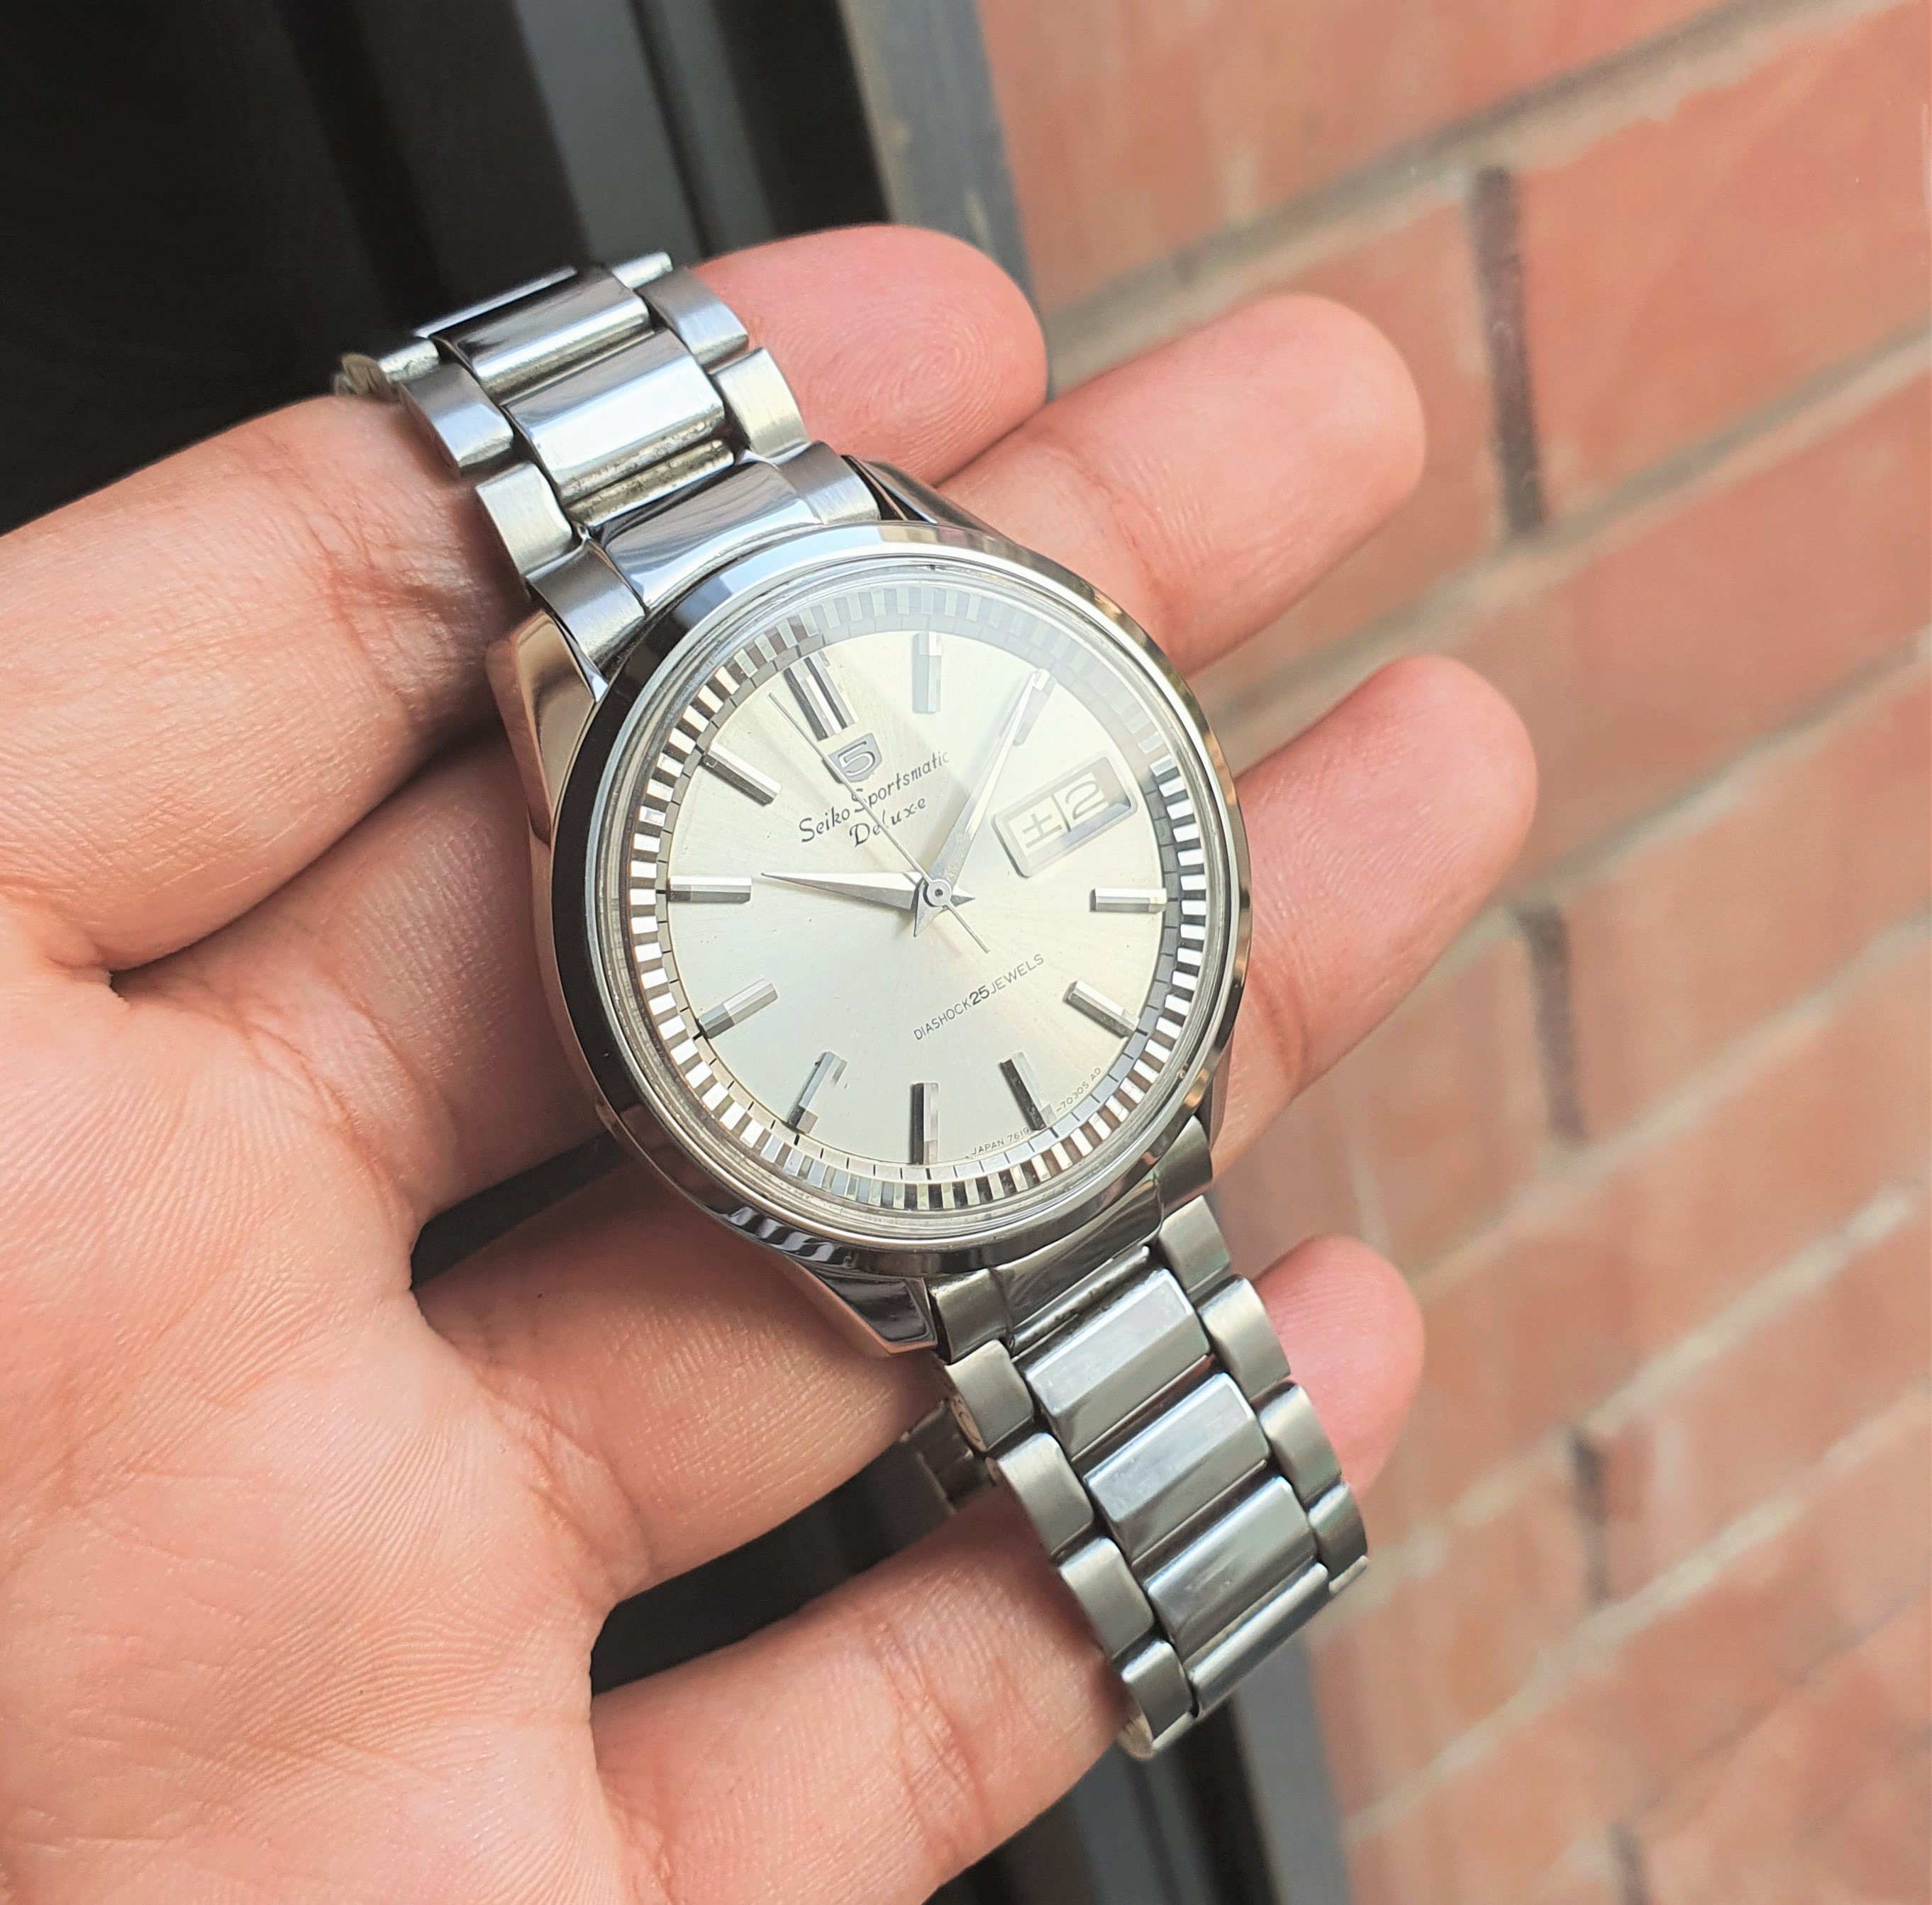 299 USD] FS: Seiko Sportsmatic Deluxe 1966 38mm Jumbo SERVICED Ultra Rare  Vintage Watch $299 Shipped | WatchCharts